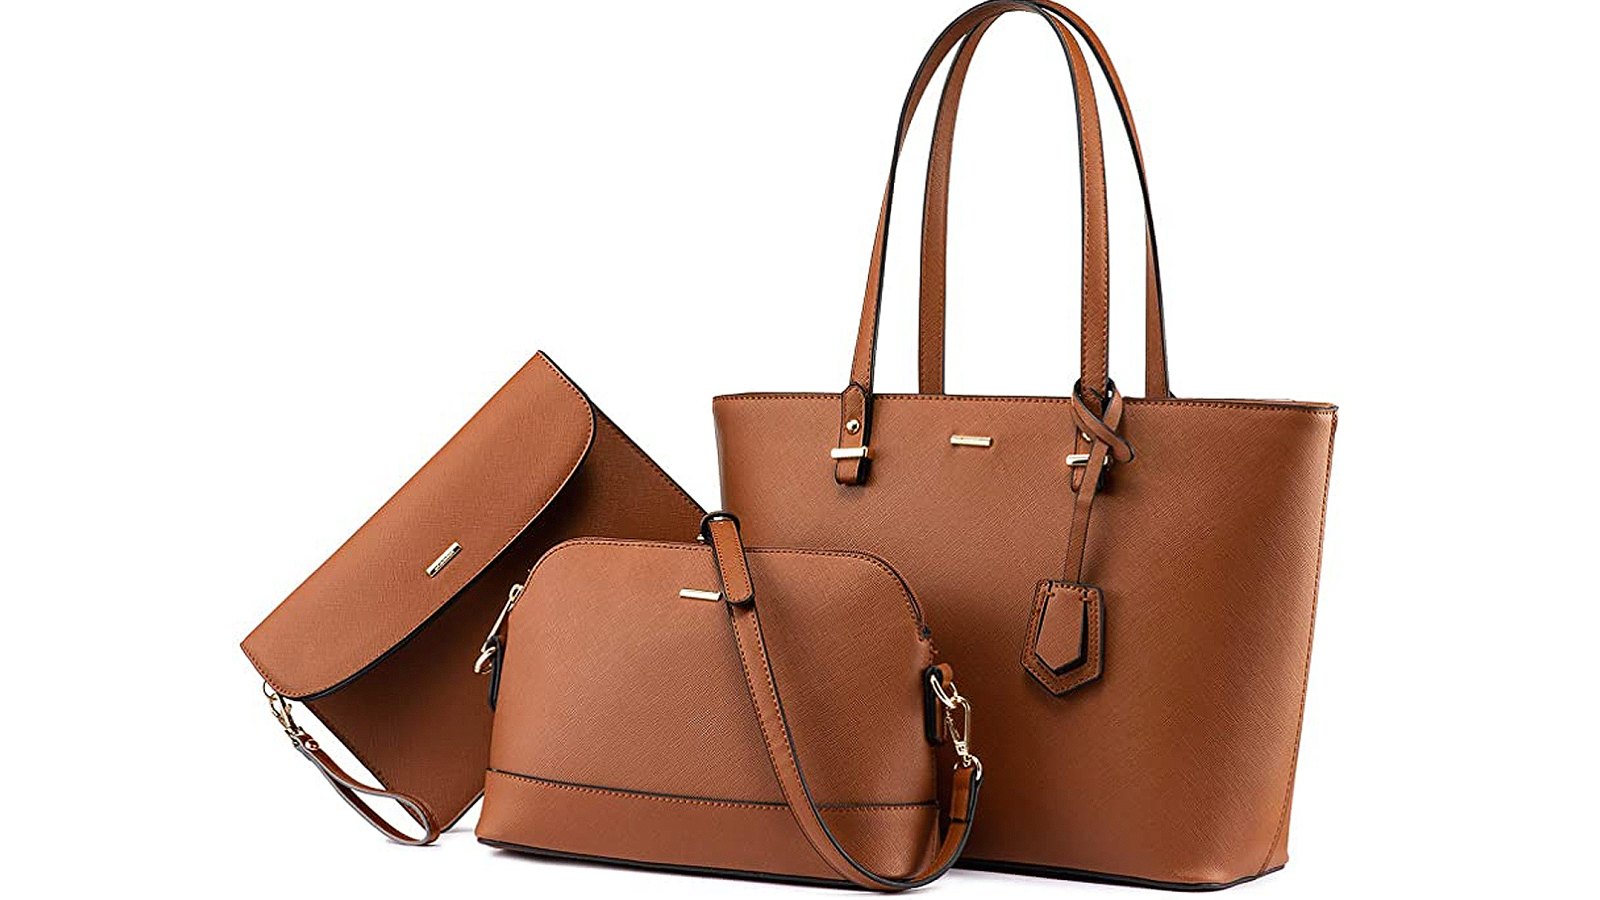 Photos from 10 Quality Handbags That Will Last Forever